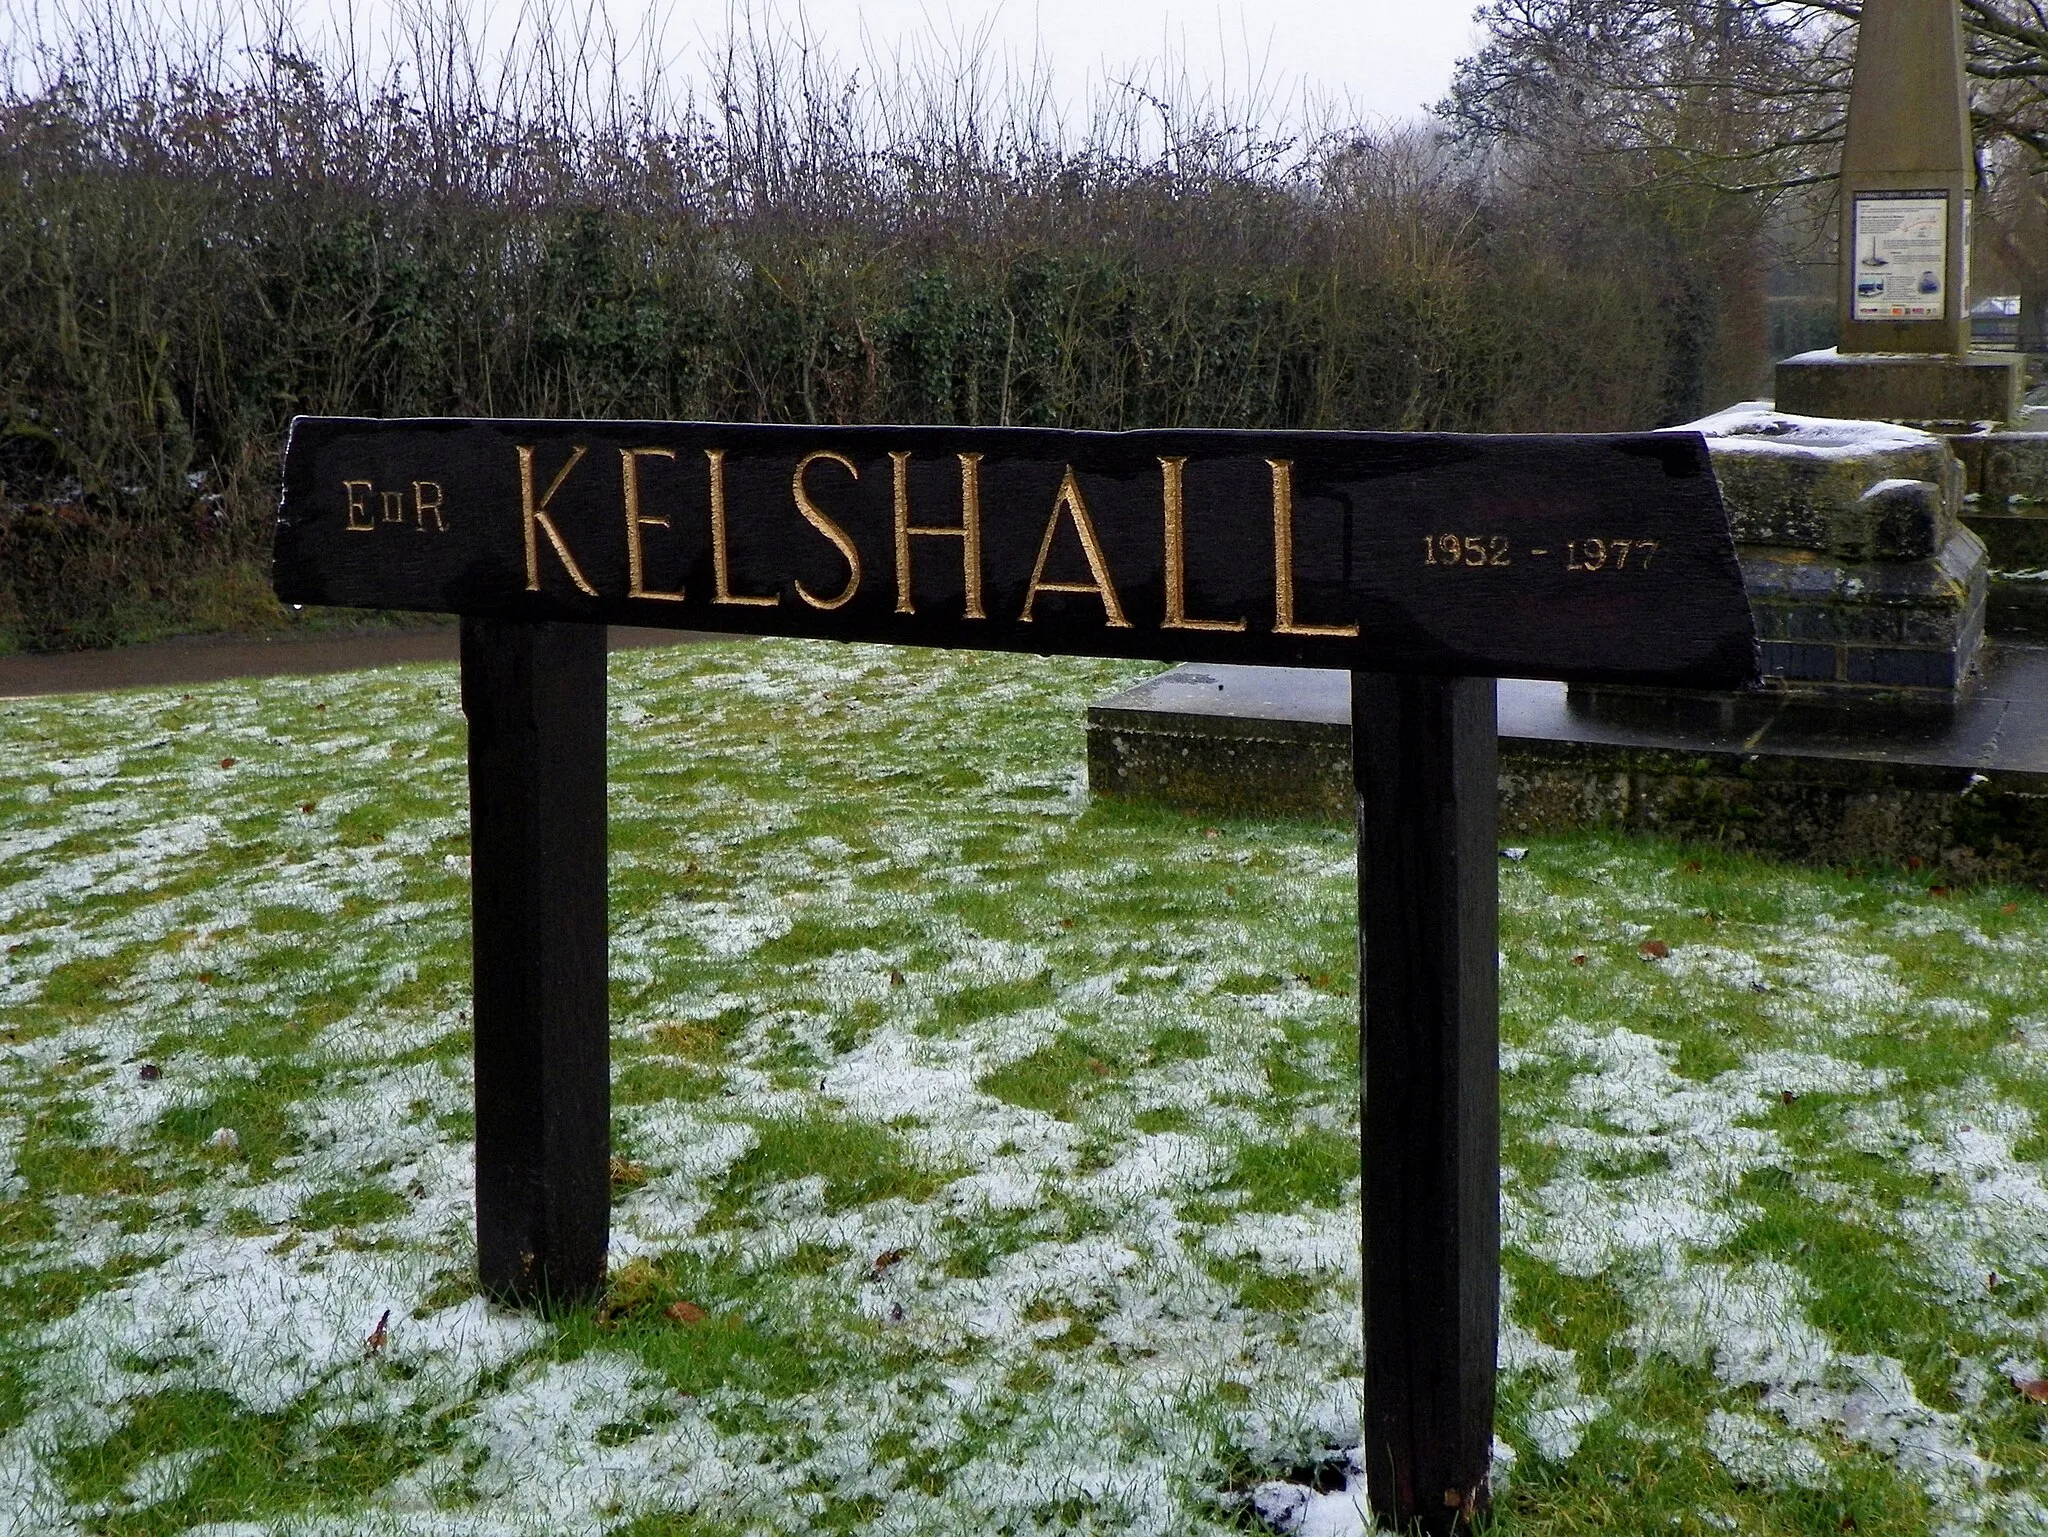 Photo showing: Kelshall sign, Kelshall, Hertfordshire.

GOC Hertfordshire's walk on 11 February 2017, a 7.3-mile circular walk in and around Therfield, Sandon and Kelshall in Hertfordshire. Julian S led the walk, which was attended by 10 people and two dogs. You can view my other photos of this event, read the original event report, find out more about the Gay Outdoor Club or see my collections.